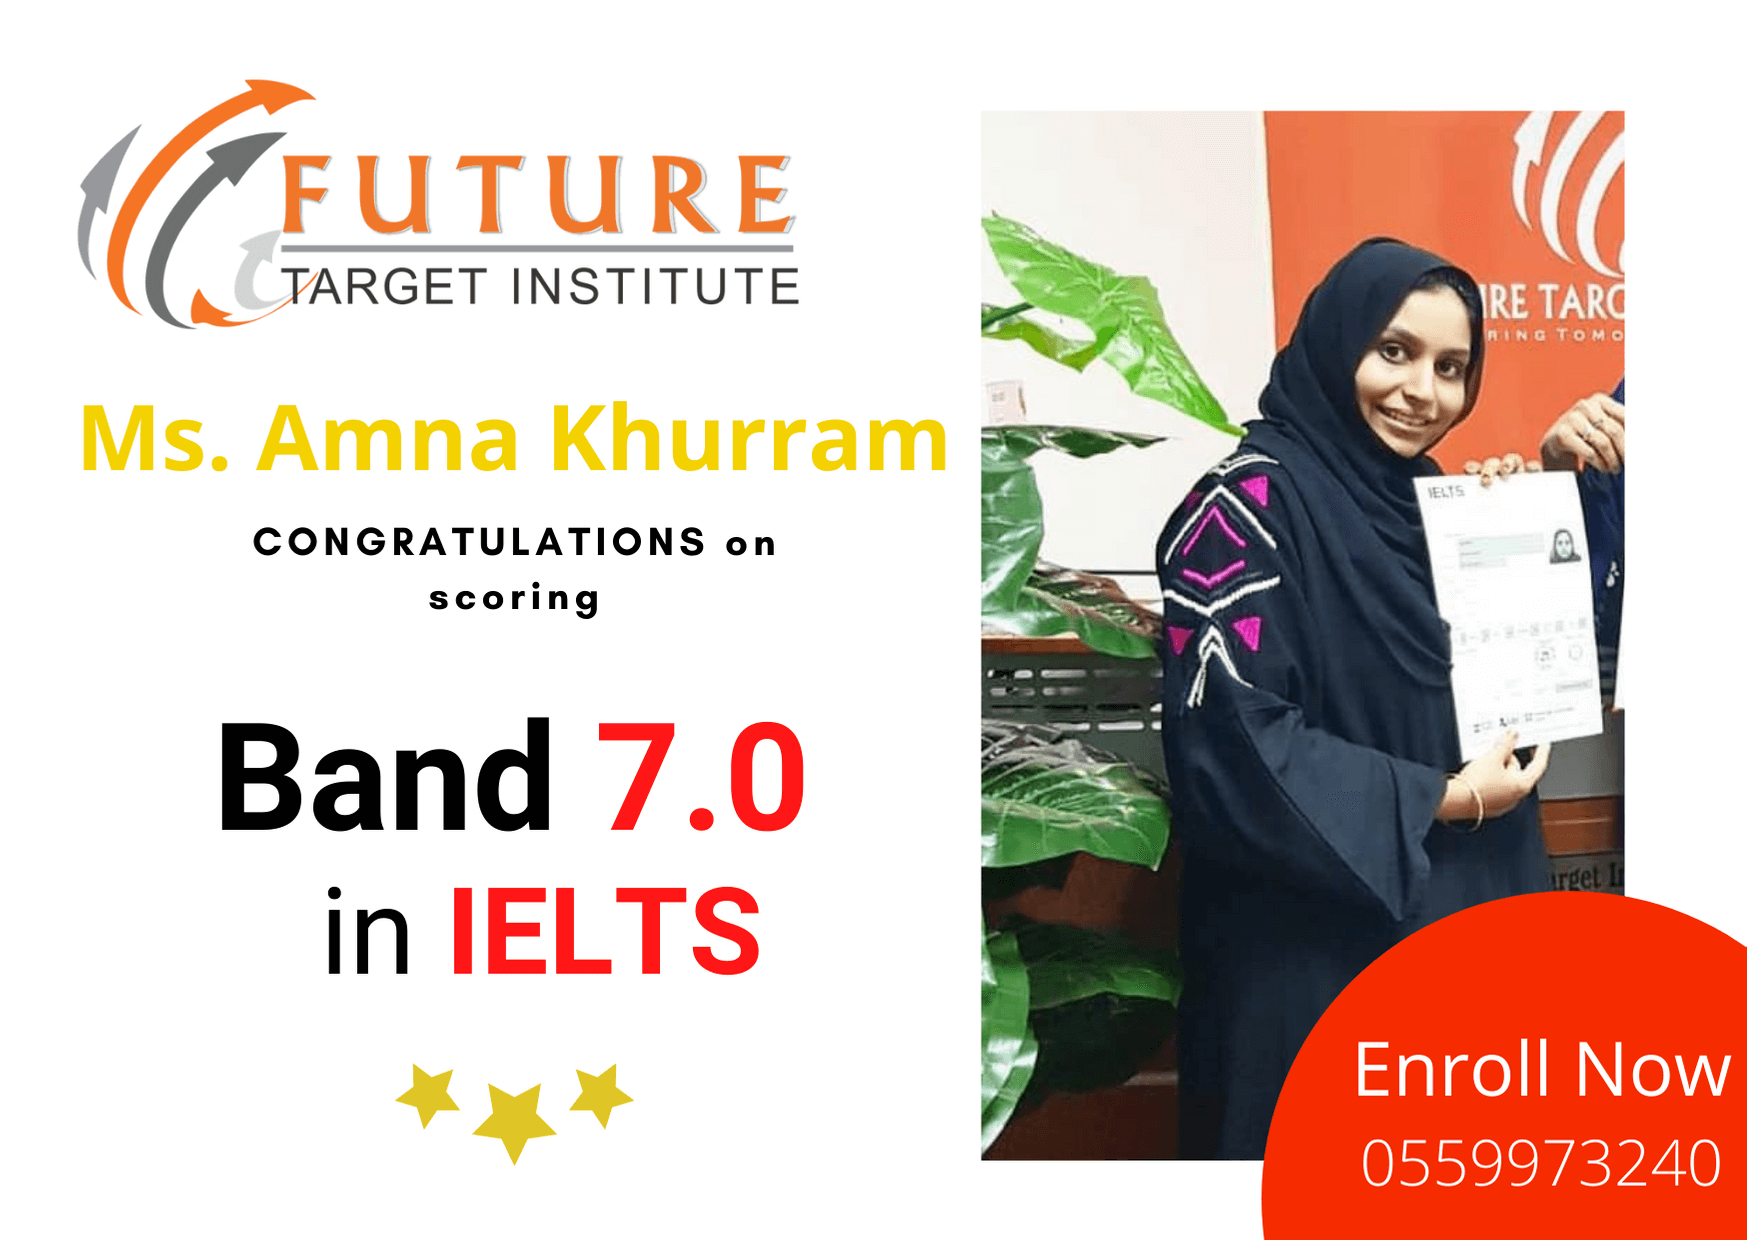 How to prepare for IELTS like Ms Divya who scored Band 8 by preparing with FTI's IELTS listening practice test.